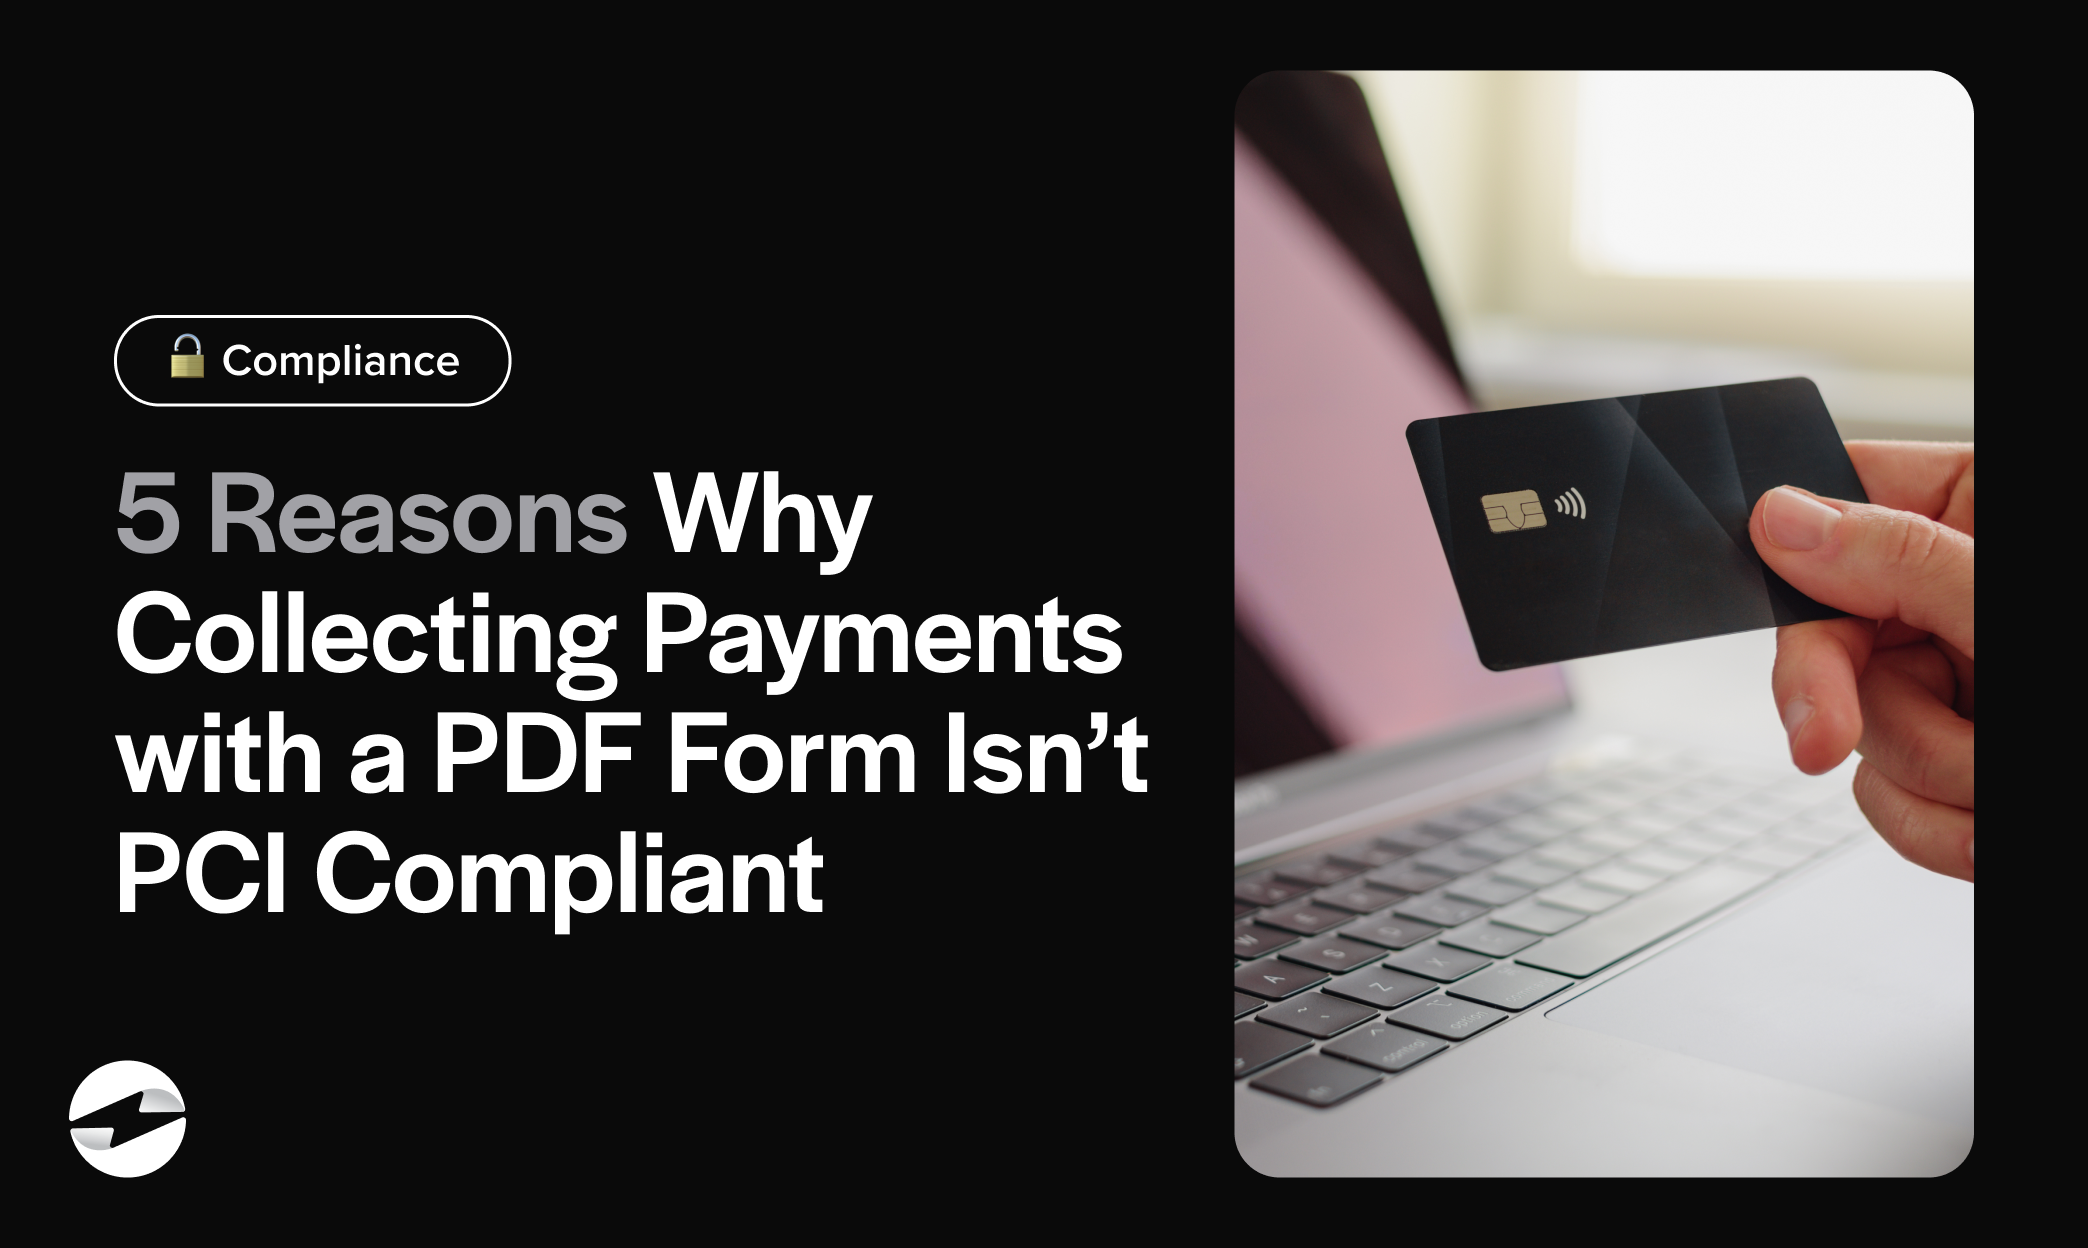 5 Reasons Why Collecting Payments with a PDF Form Isn’t PCI Compliant